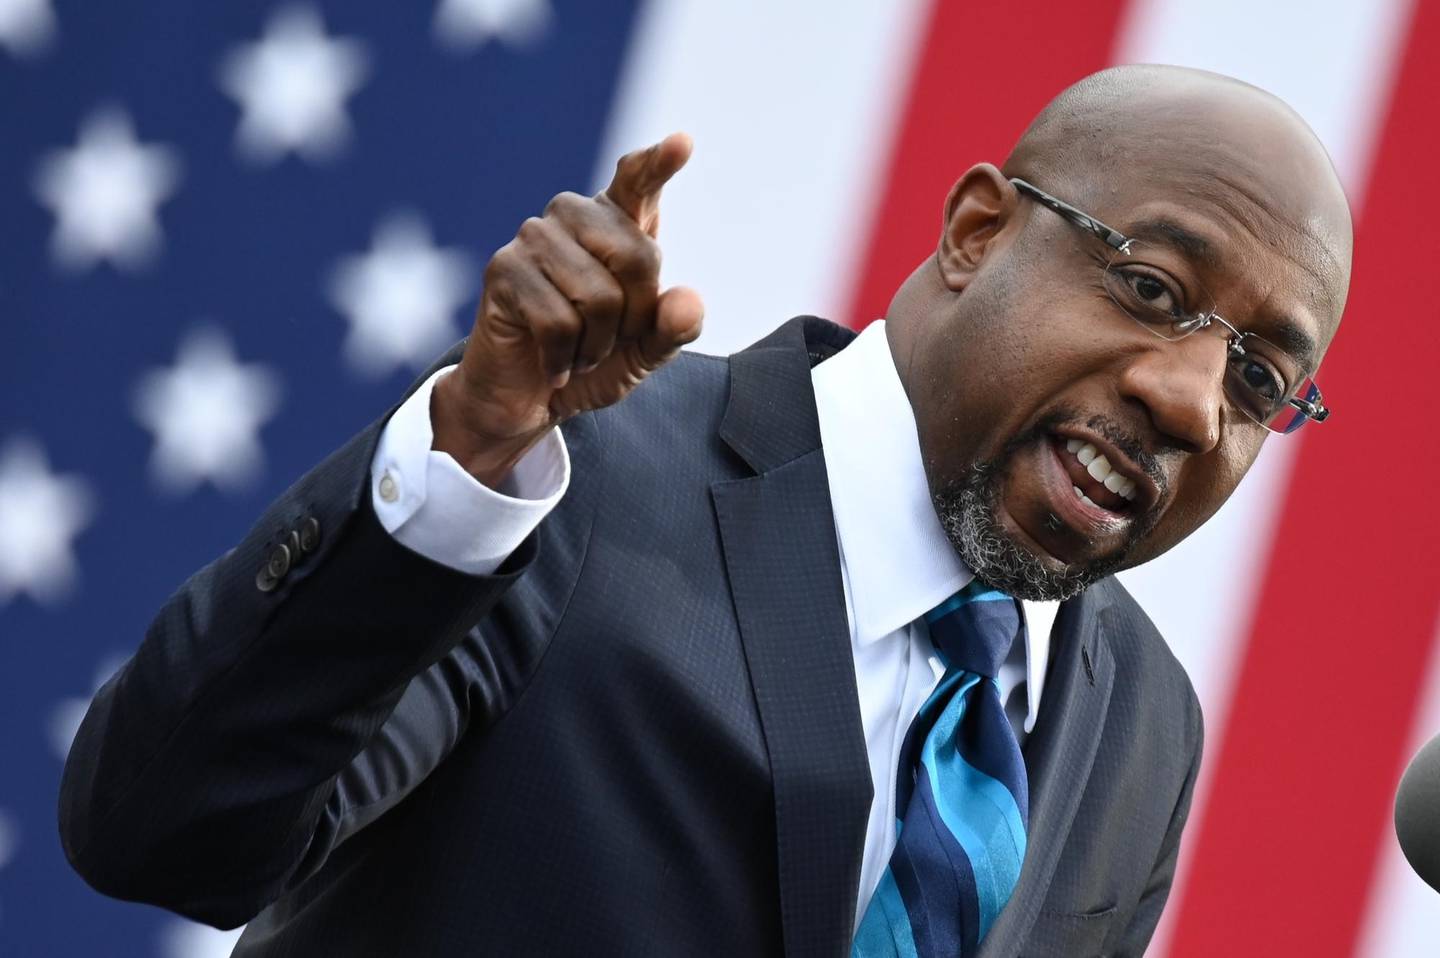 (FILES) In this file photo taken on December 15, 2020 Democratic Senate candidate Reverend Raphael Warnock speaks during a campaign rally in Atlanta, Georgia. - Democrat Raphael Warnock ousted an incumbent Republican onJanuary 6, 2021 in the first of two critical runoff elections in Georgia that will decide control of the US Senate at the outset of Joe Biden's presidency, networks projected. (Photo by JIM WATSON / AFP)